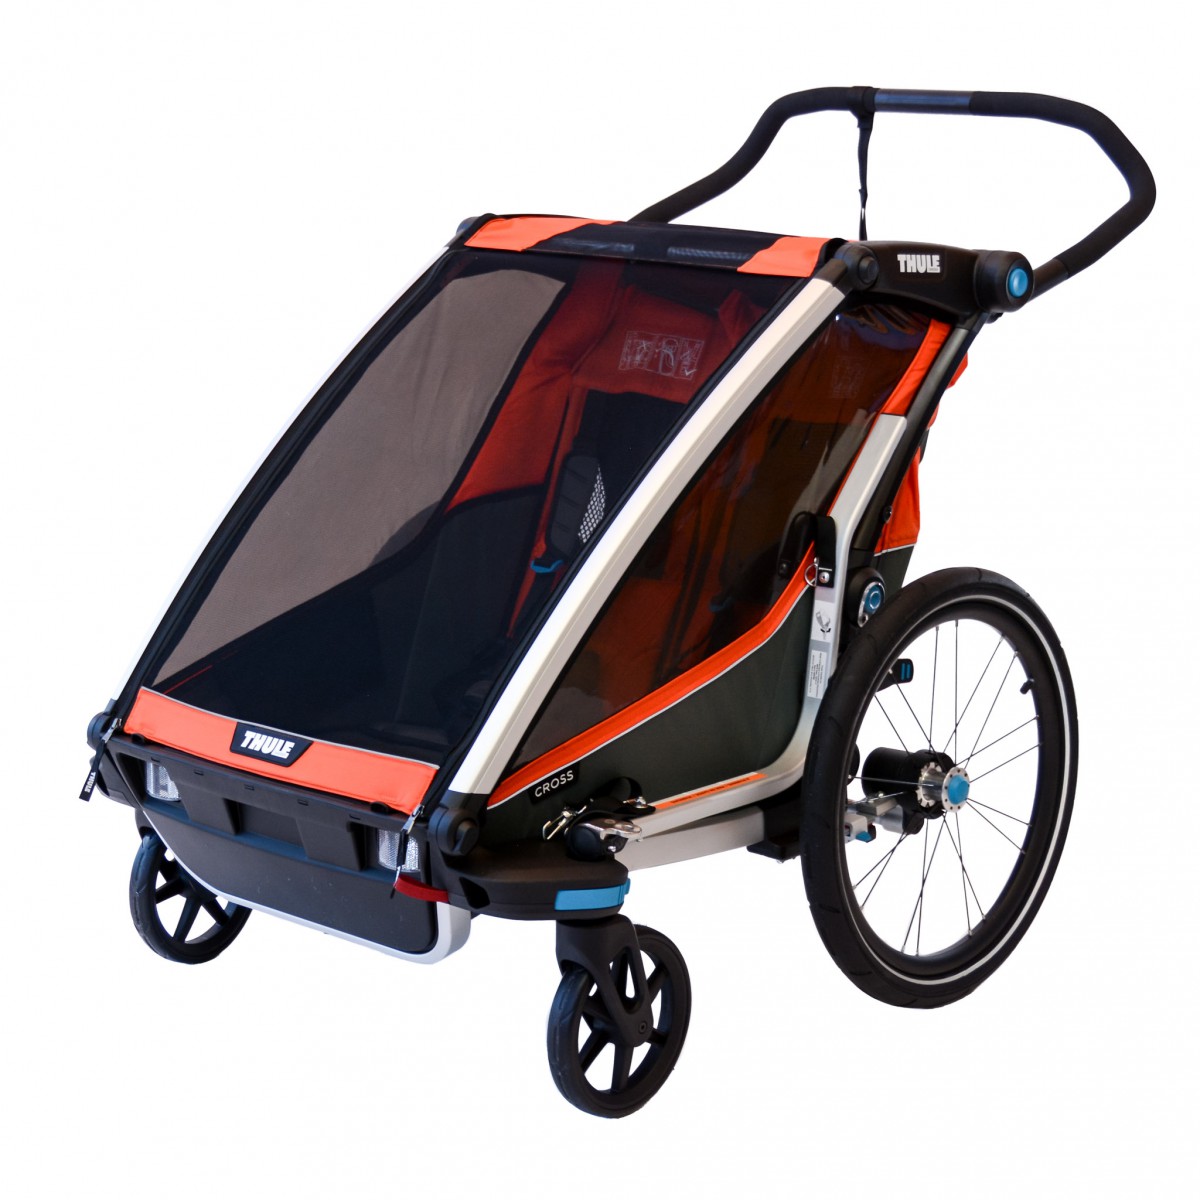 thule chariot cross 2 double stroller review